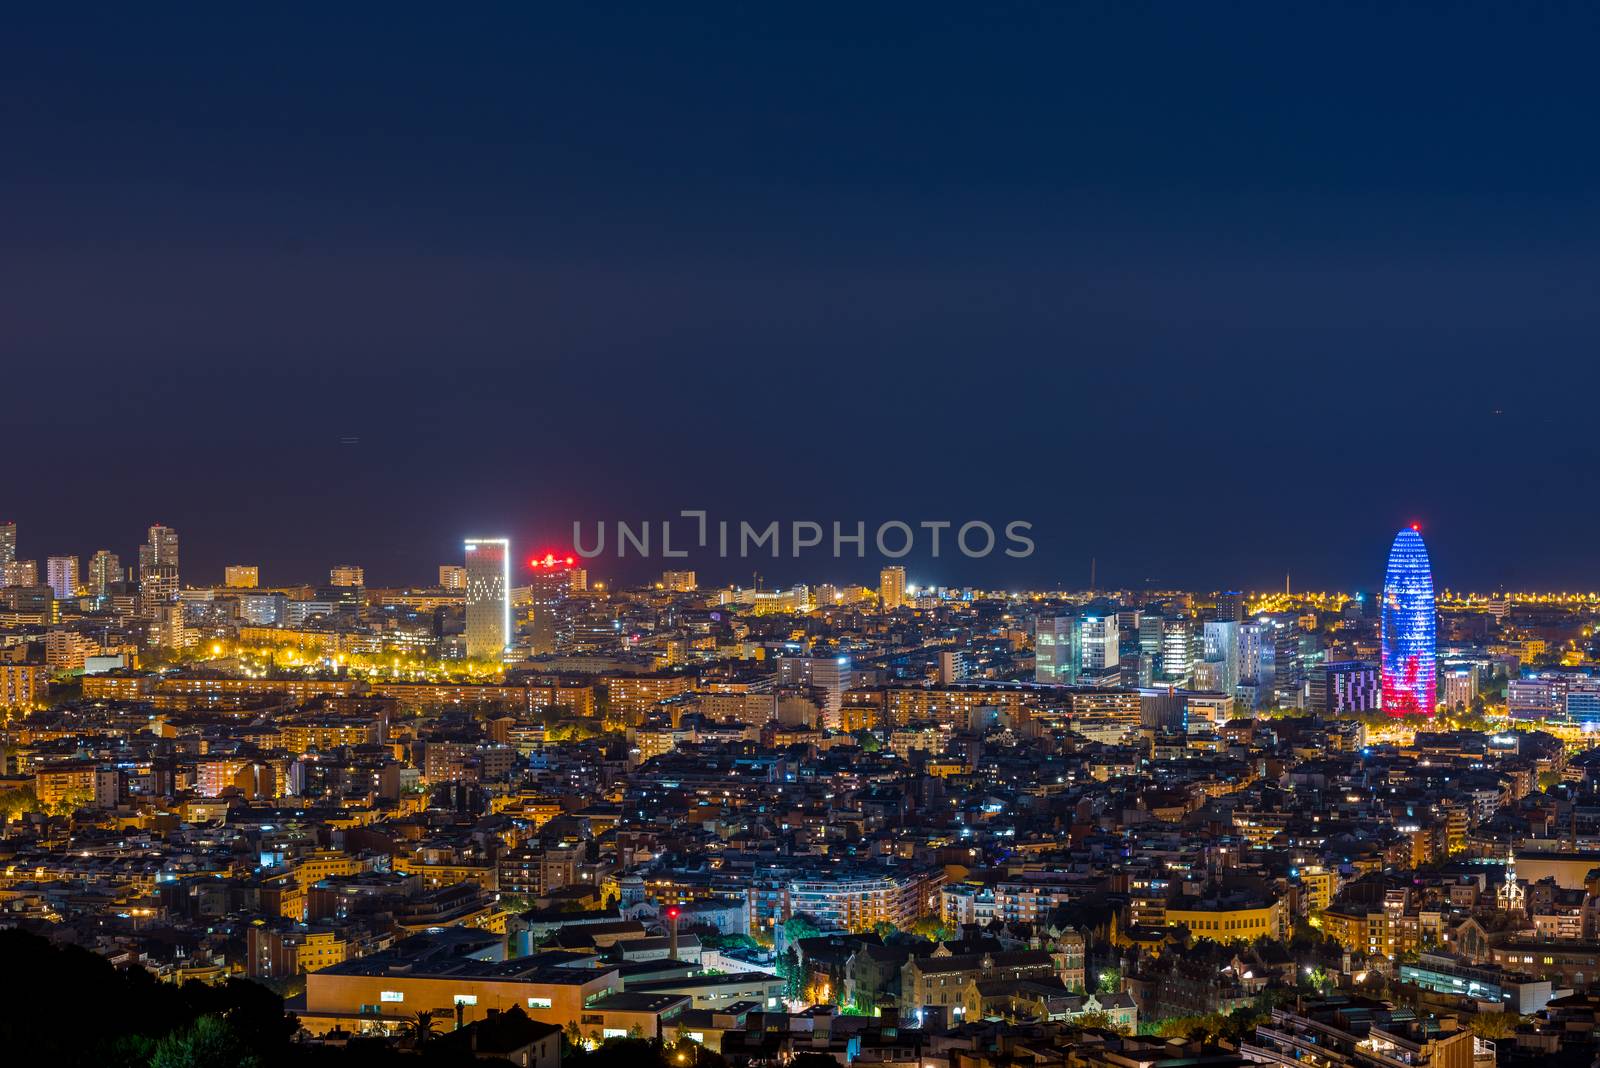 july 29 2020, BARCELONA, SPAIN: View of Barcelona city and costline in spring from the Bunkers in Carmel in the night.